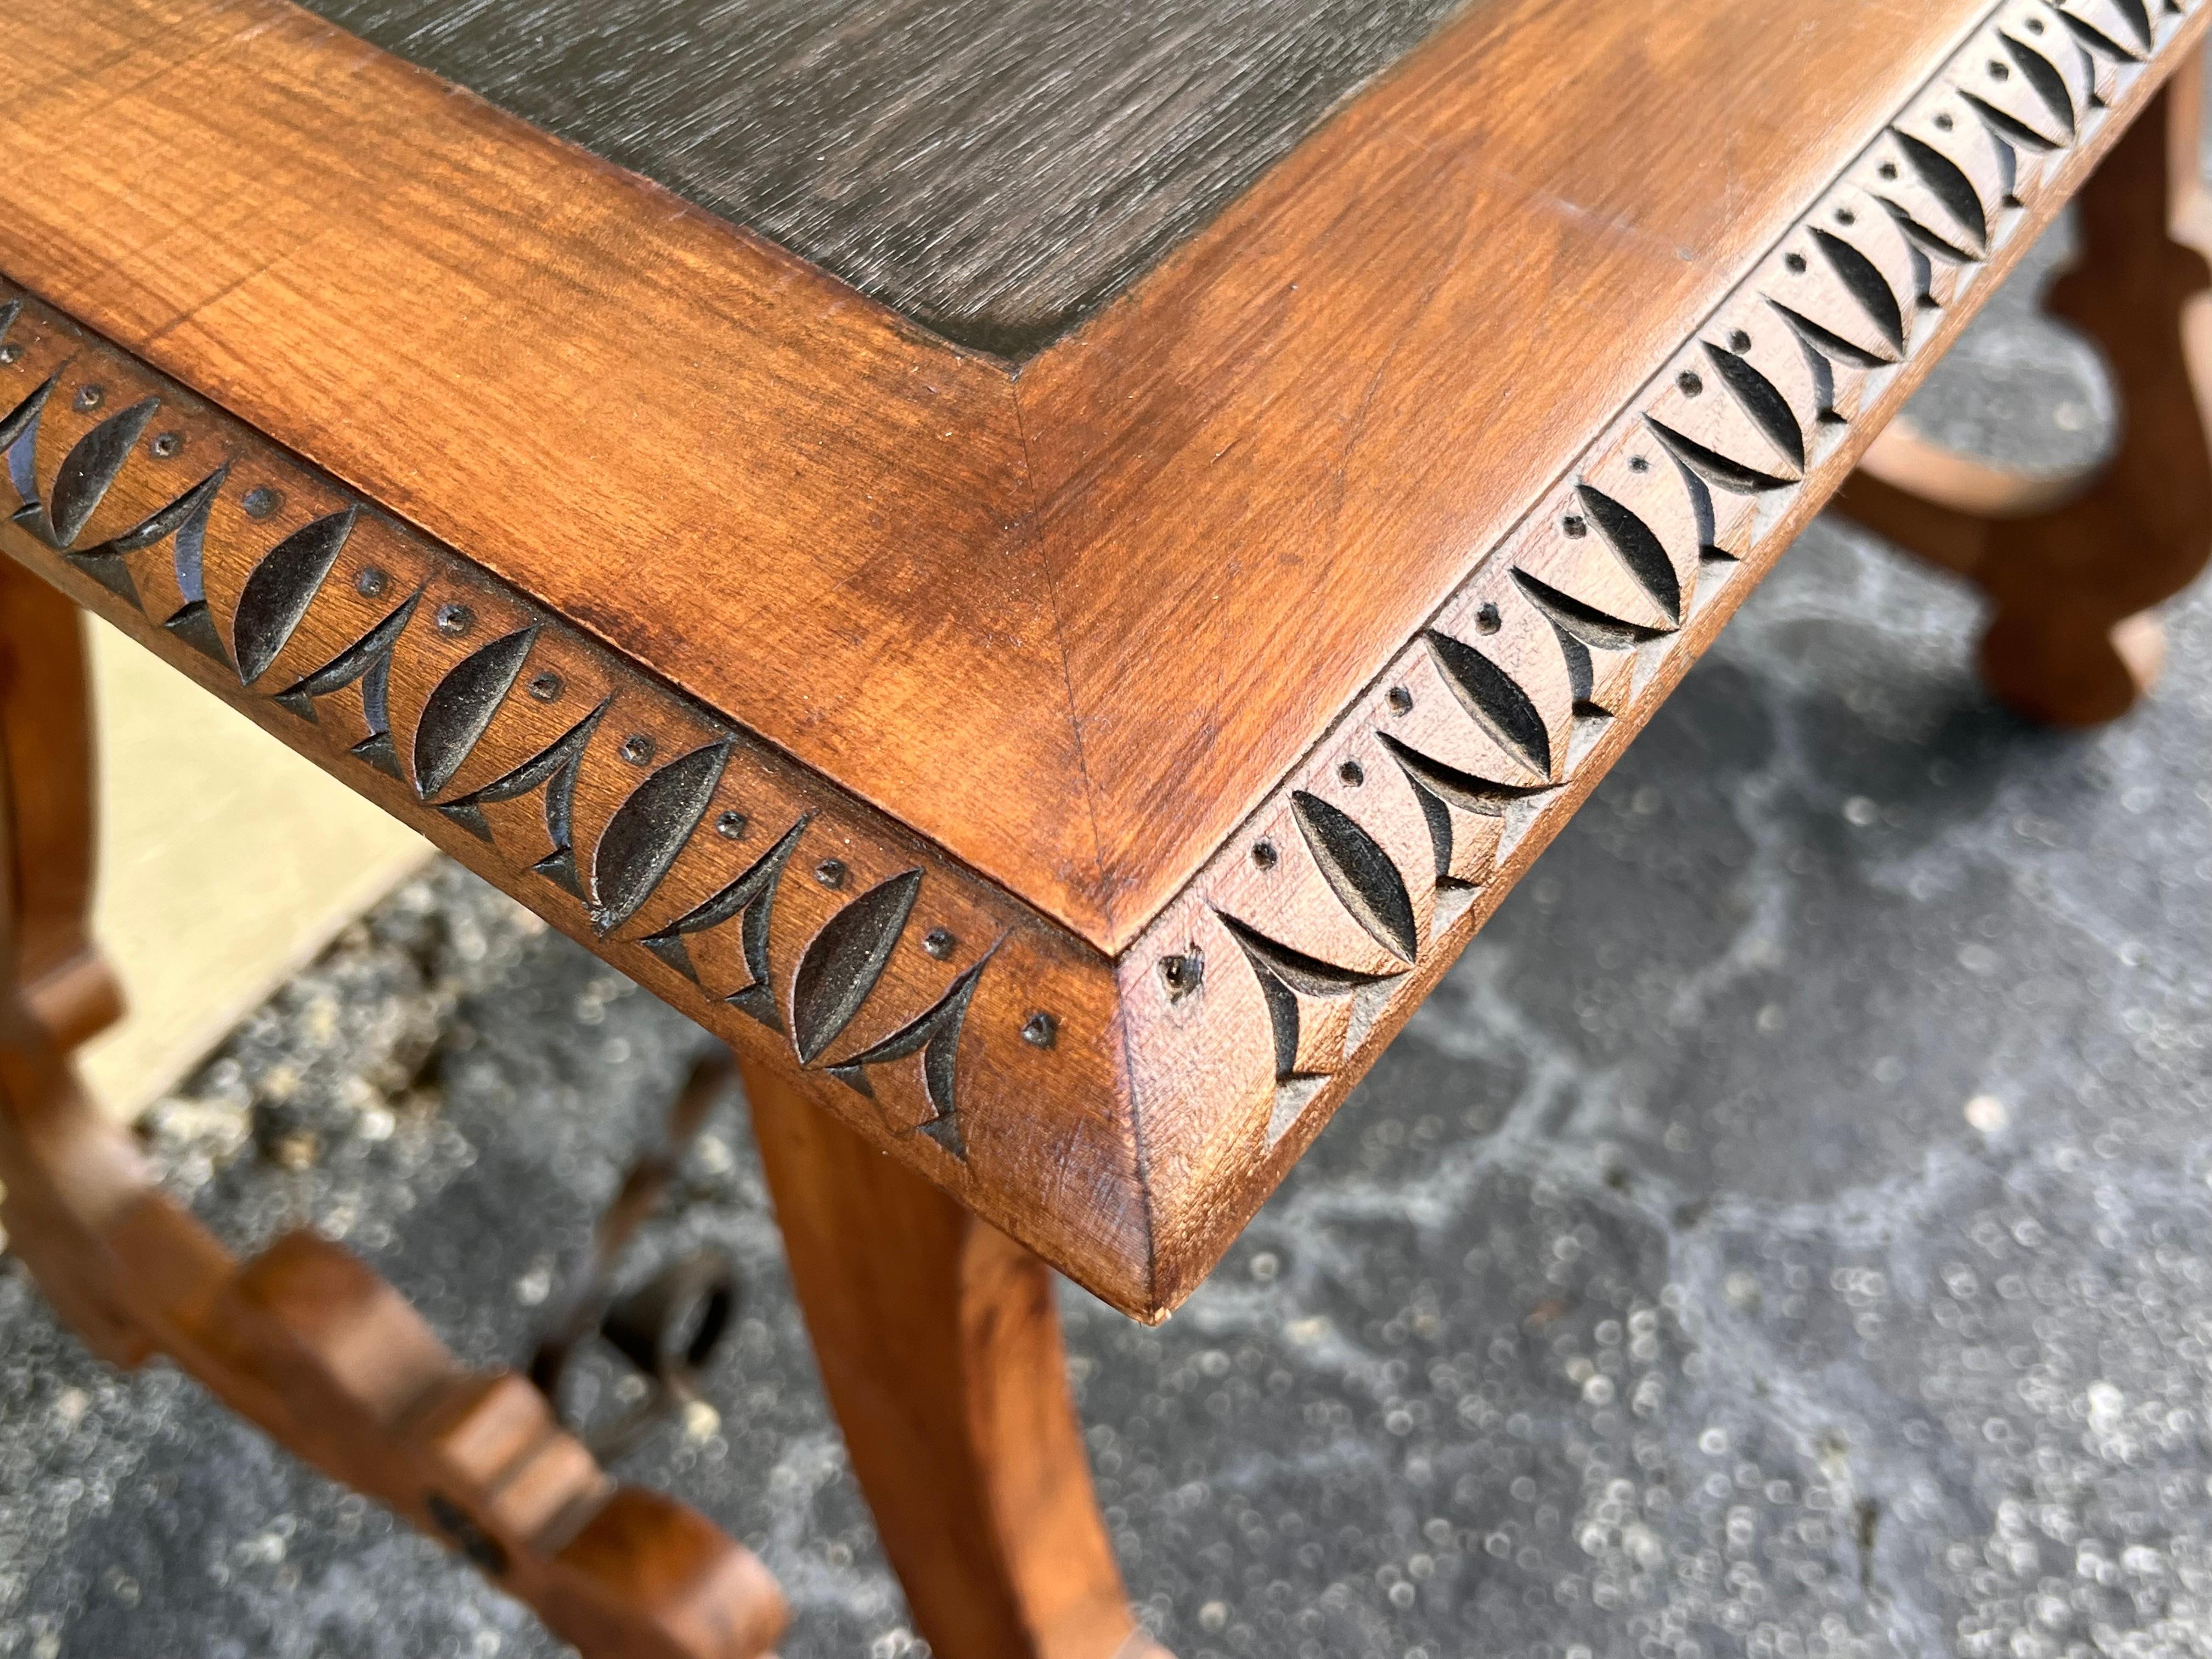 19th Century Baroque Spanish Side Table with Ebonized Top and Lyre Legs For Sale 2